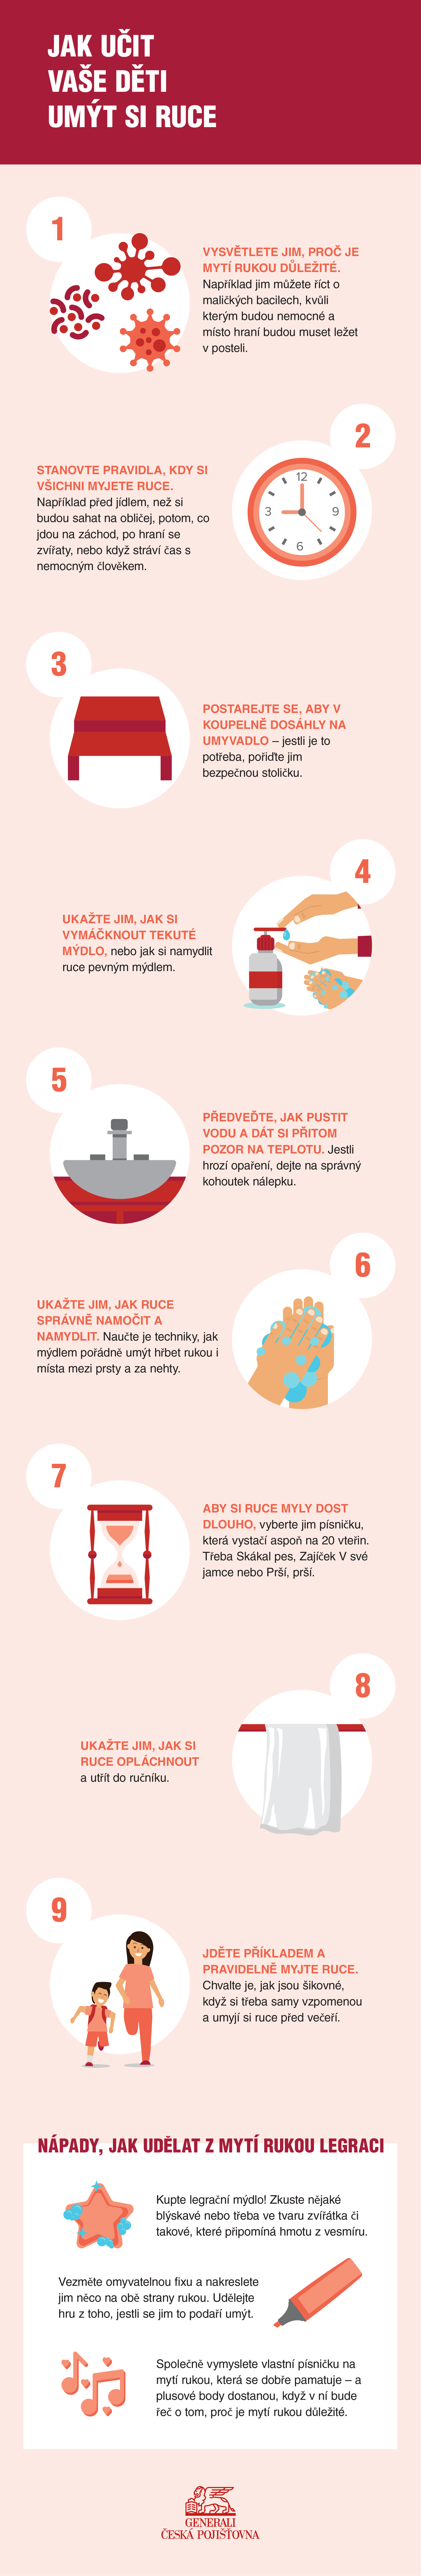 Generali_How_to_teach_your_children_to_wash_their_hands_infographic_CzechRepublic_v1-01.png